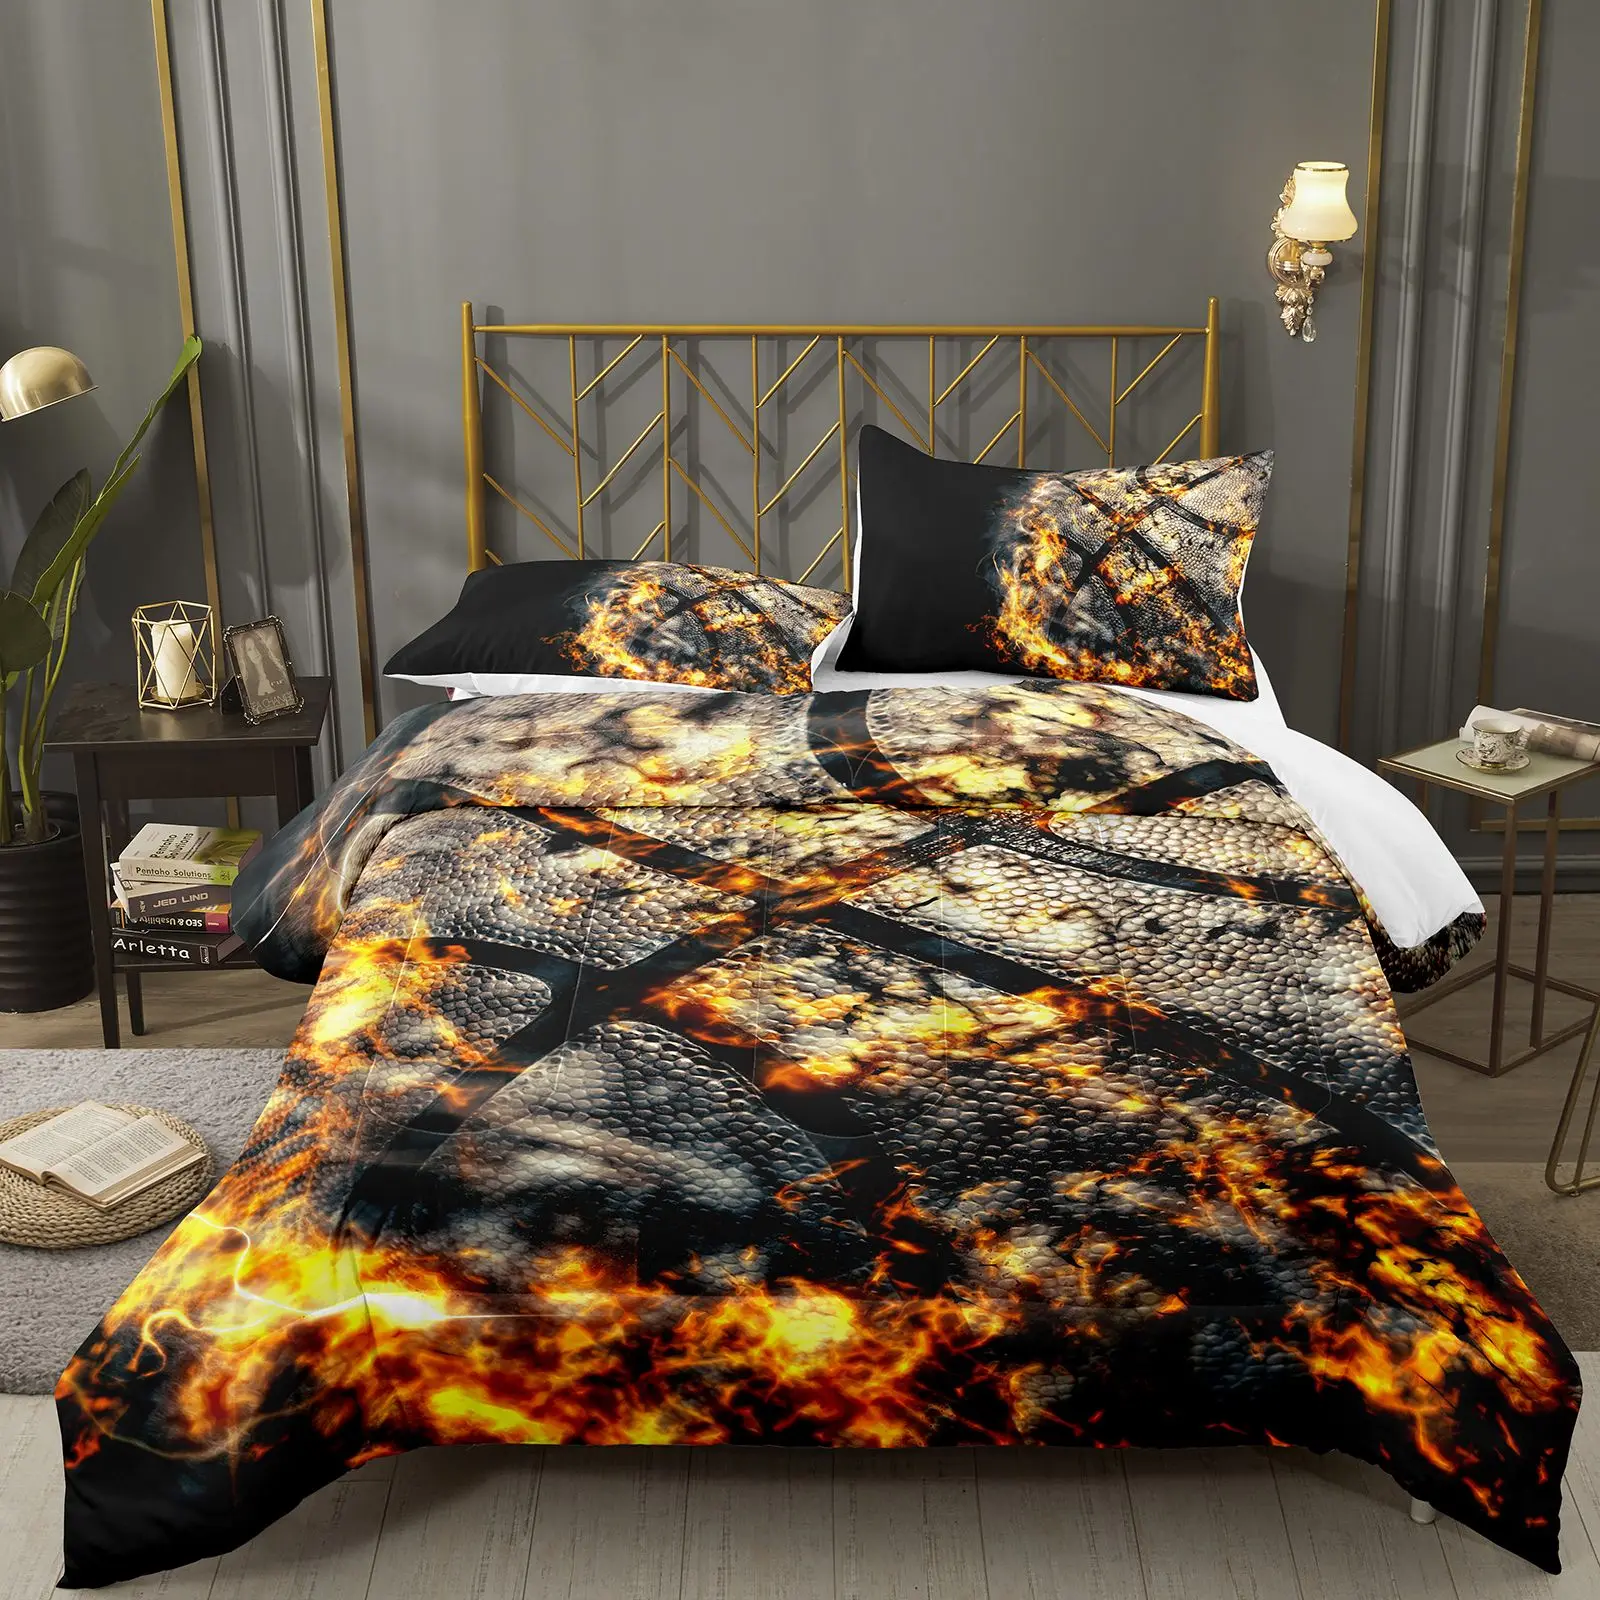 

Burning Basketball Flame Pattern Multiple Color Duvet Cover Set Bed Pillowcases Luxury Queen Comforter Bedding Sets